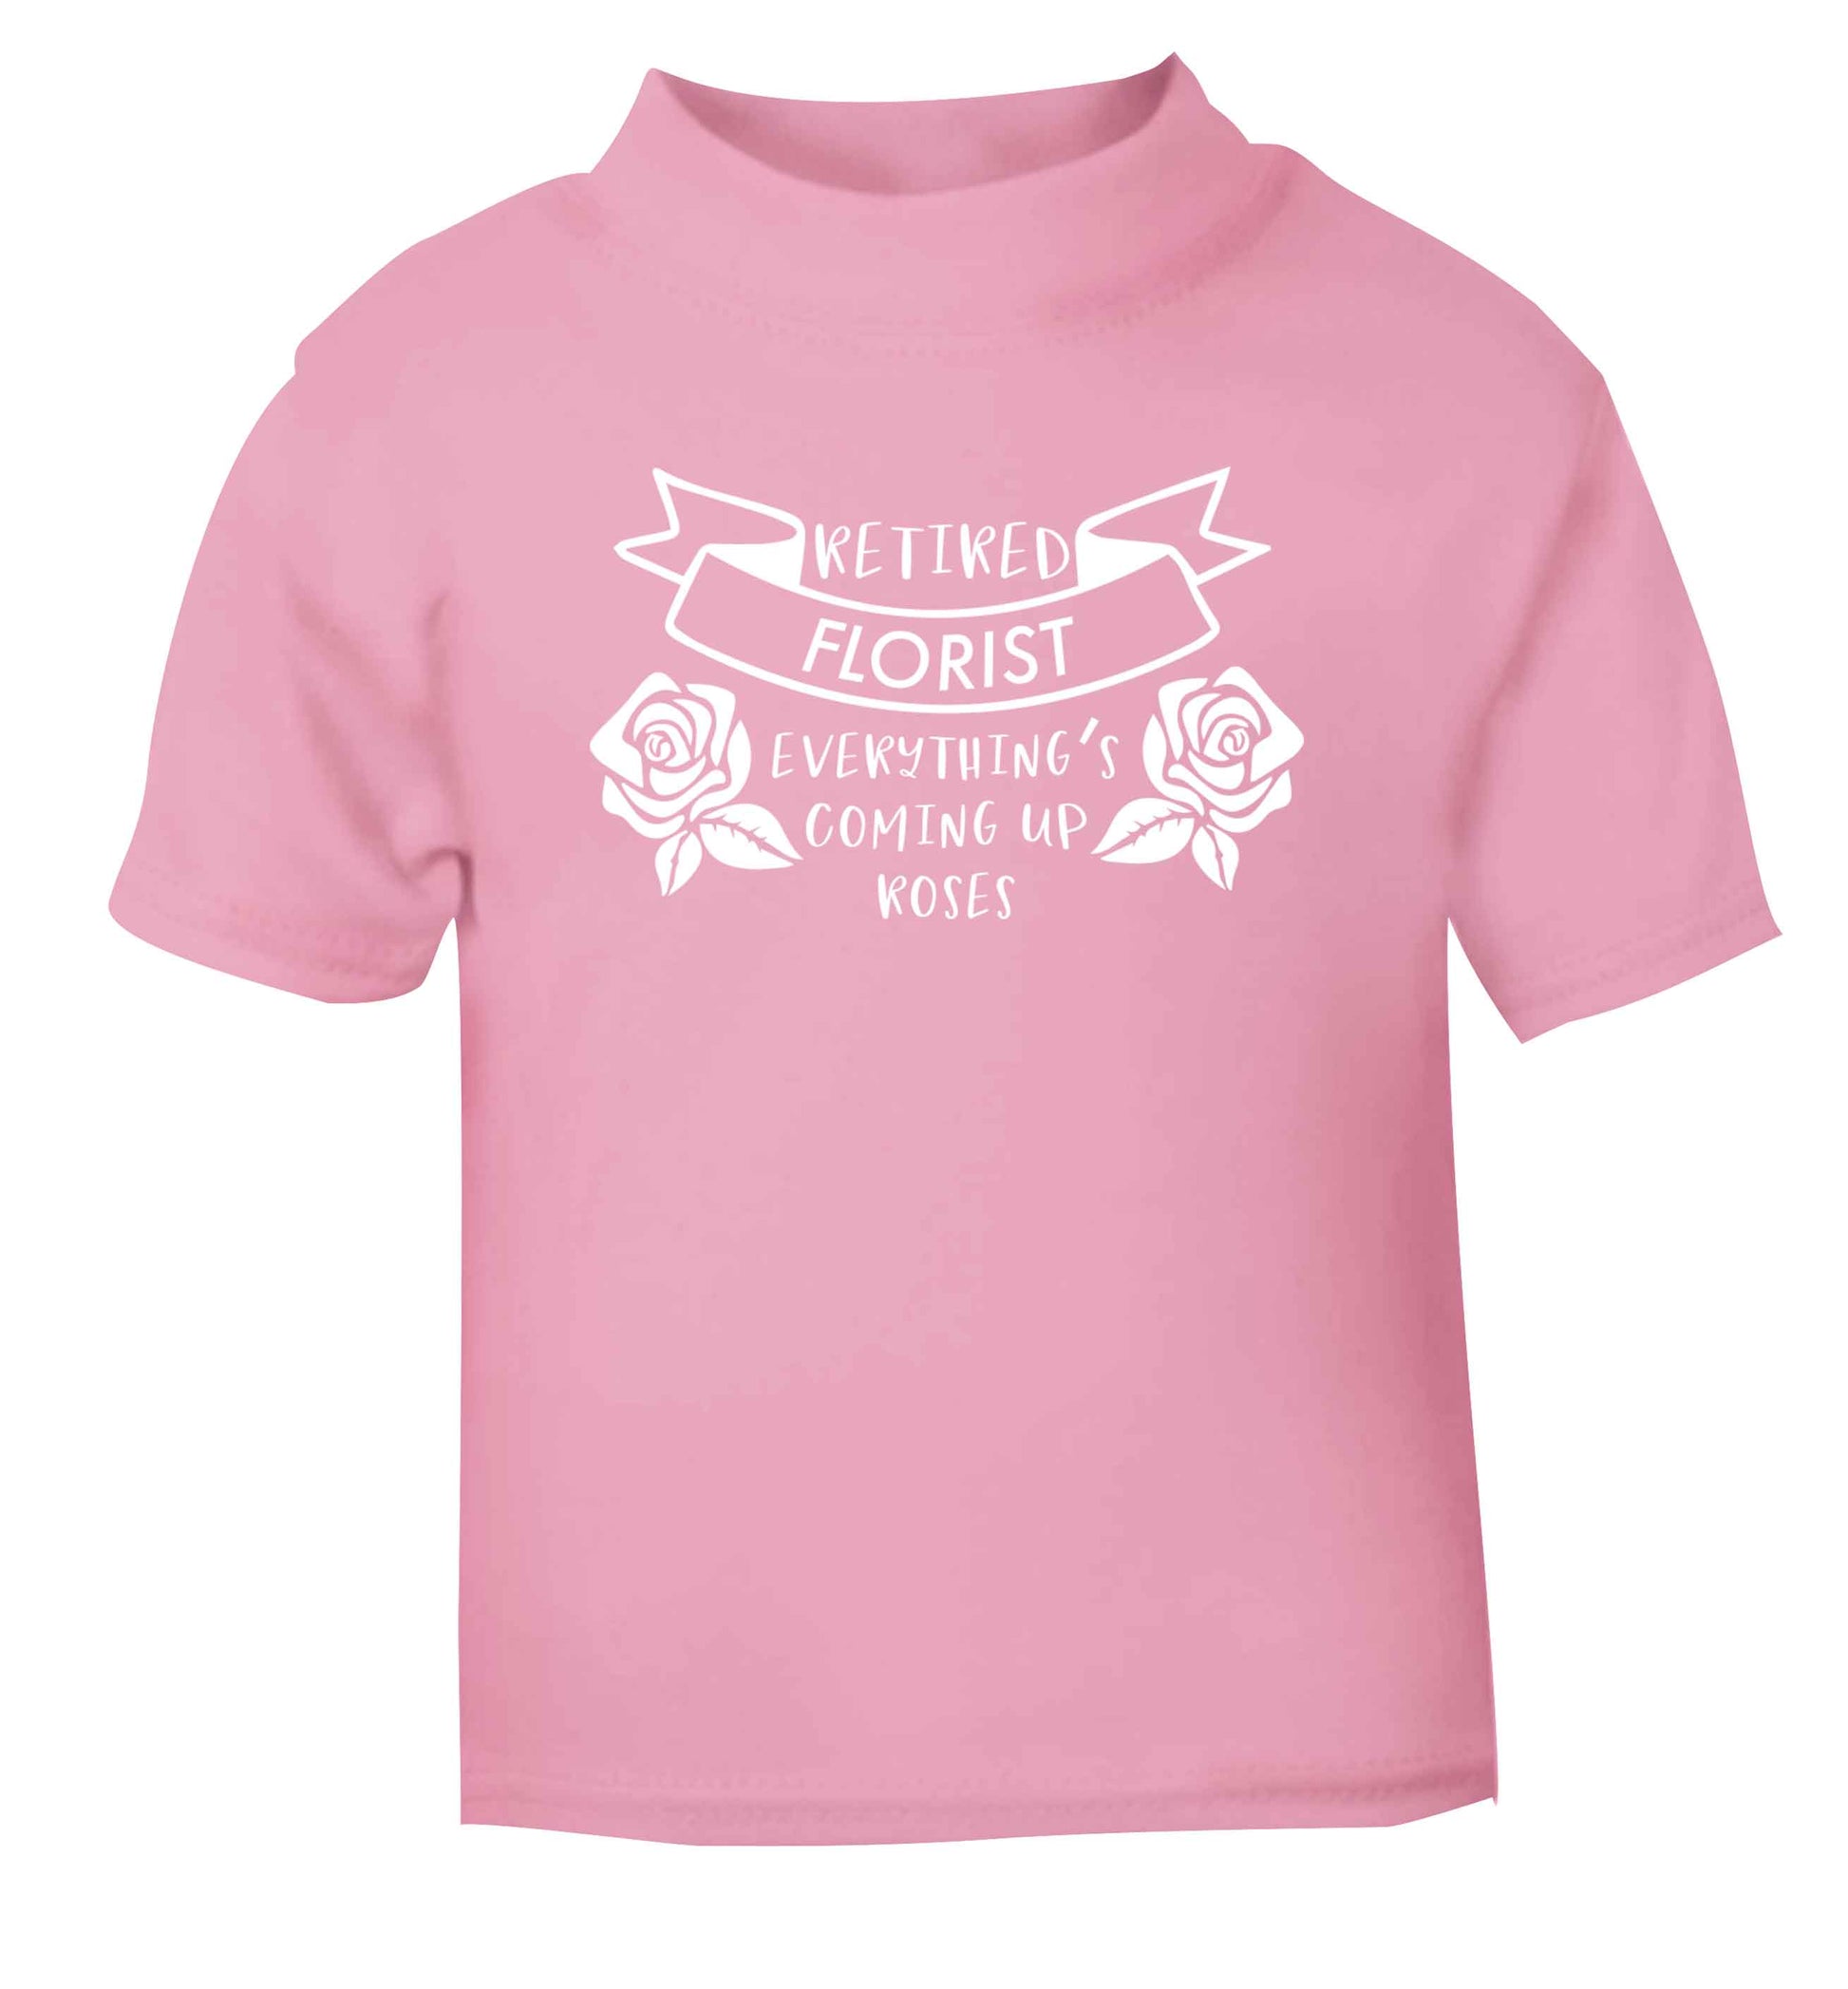 Retired florist everything's coming up roses light pink Baby Toddler Tshirt 2 Years